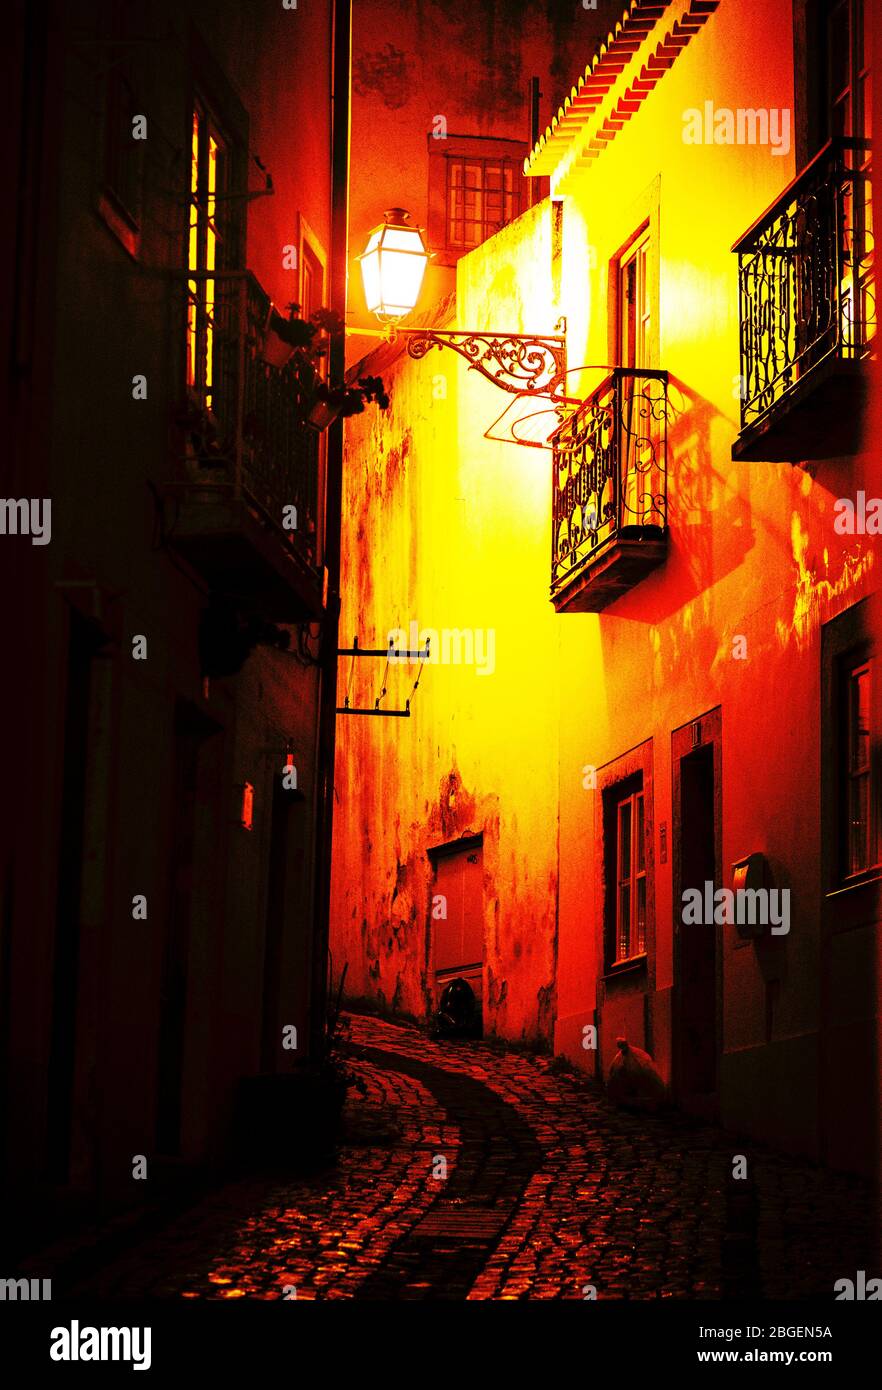 Alley in Lisbon at night Stock Photo